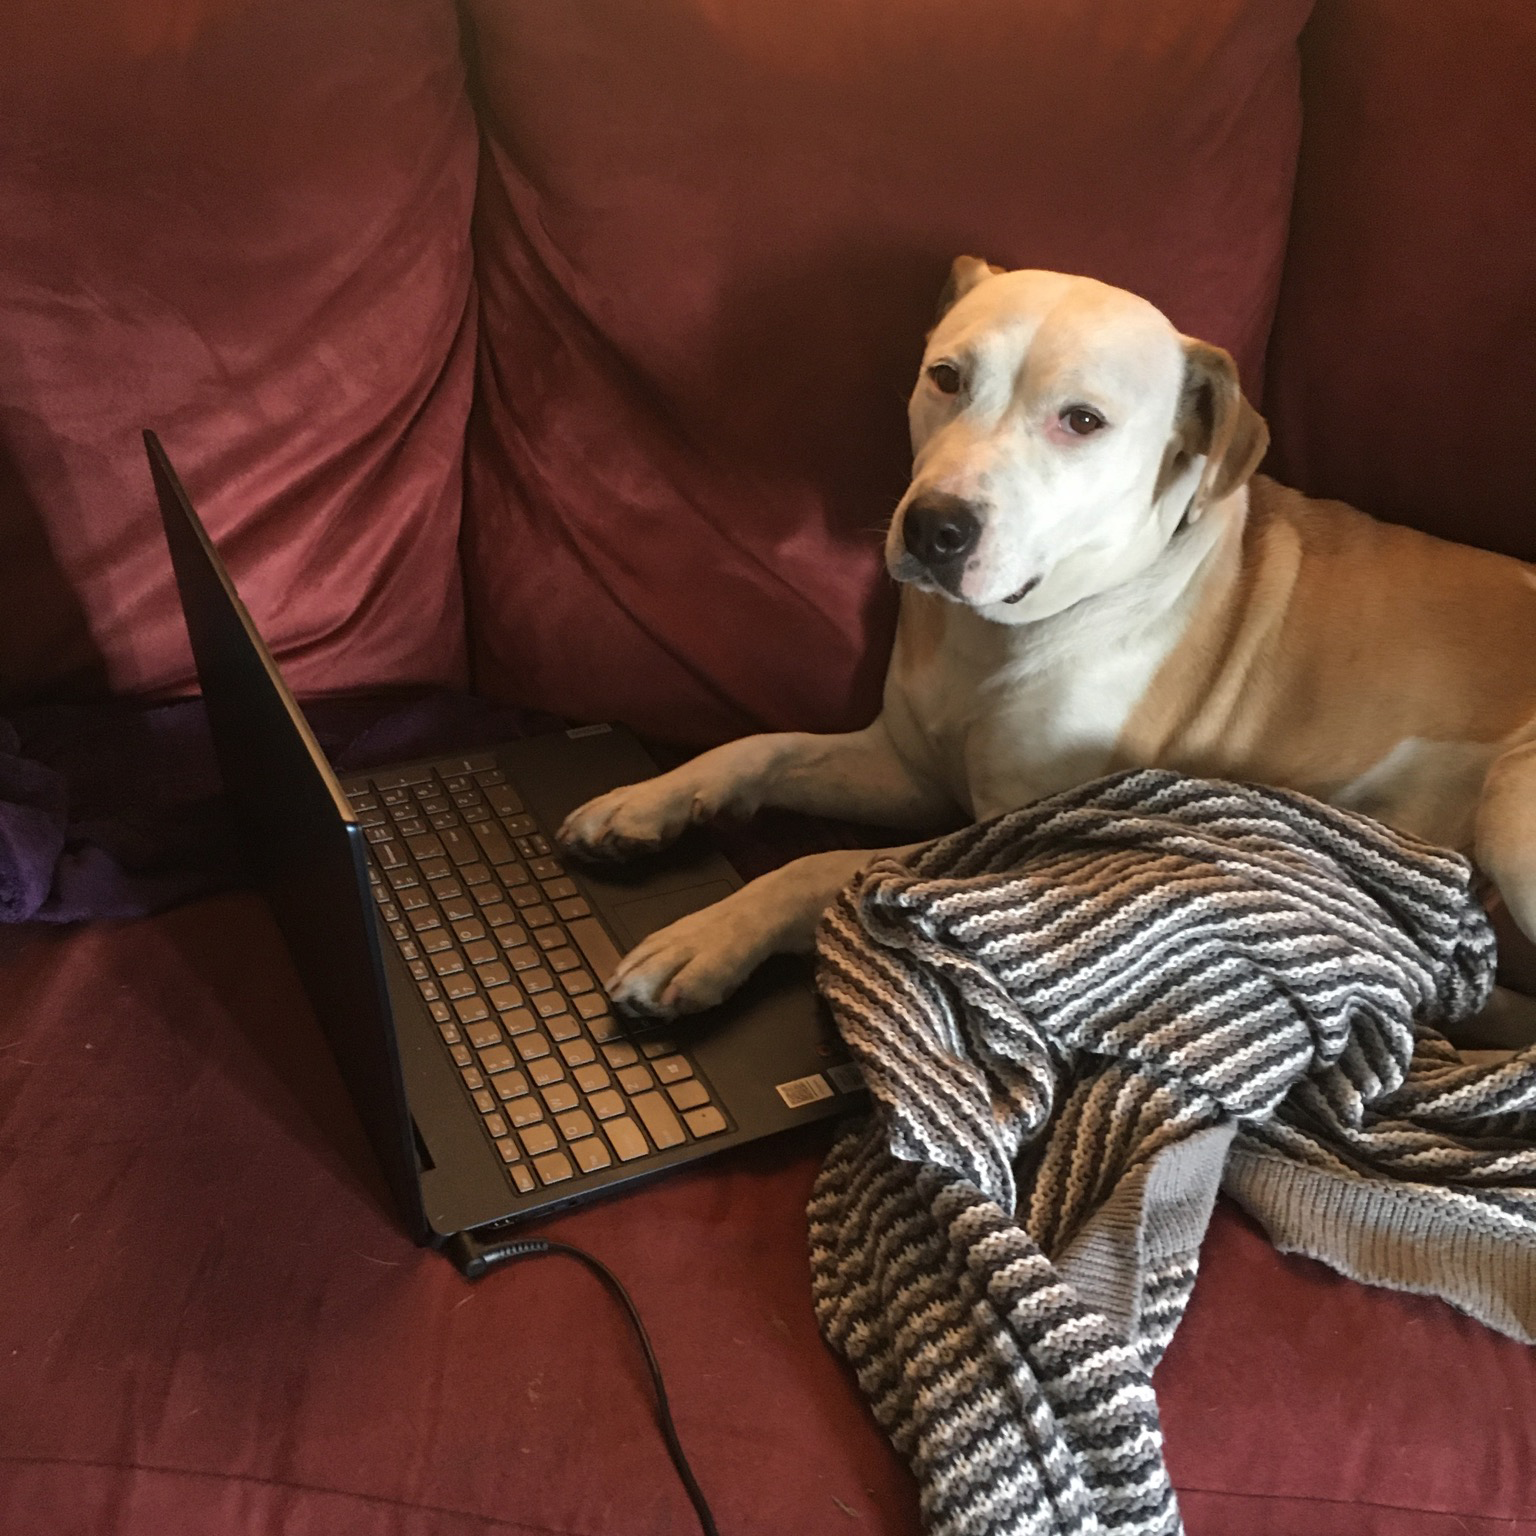 Tan and white dog named Nori laying on a red couch with her front paws on a laptop.